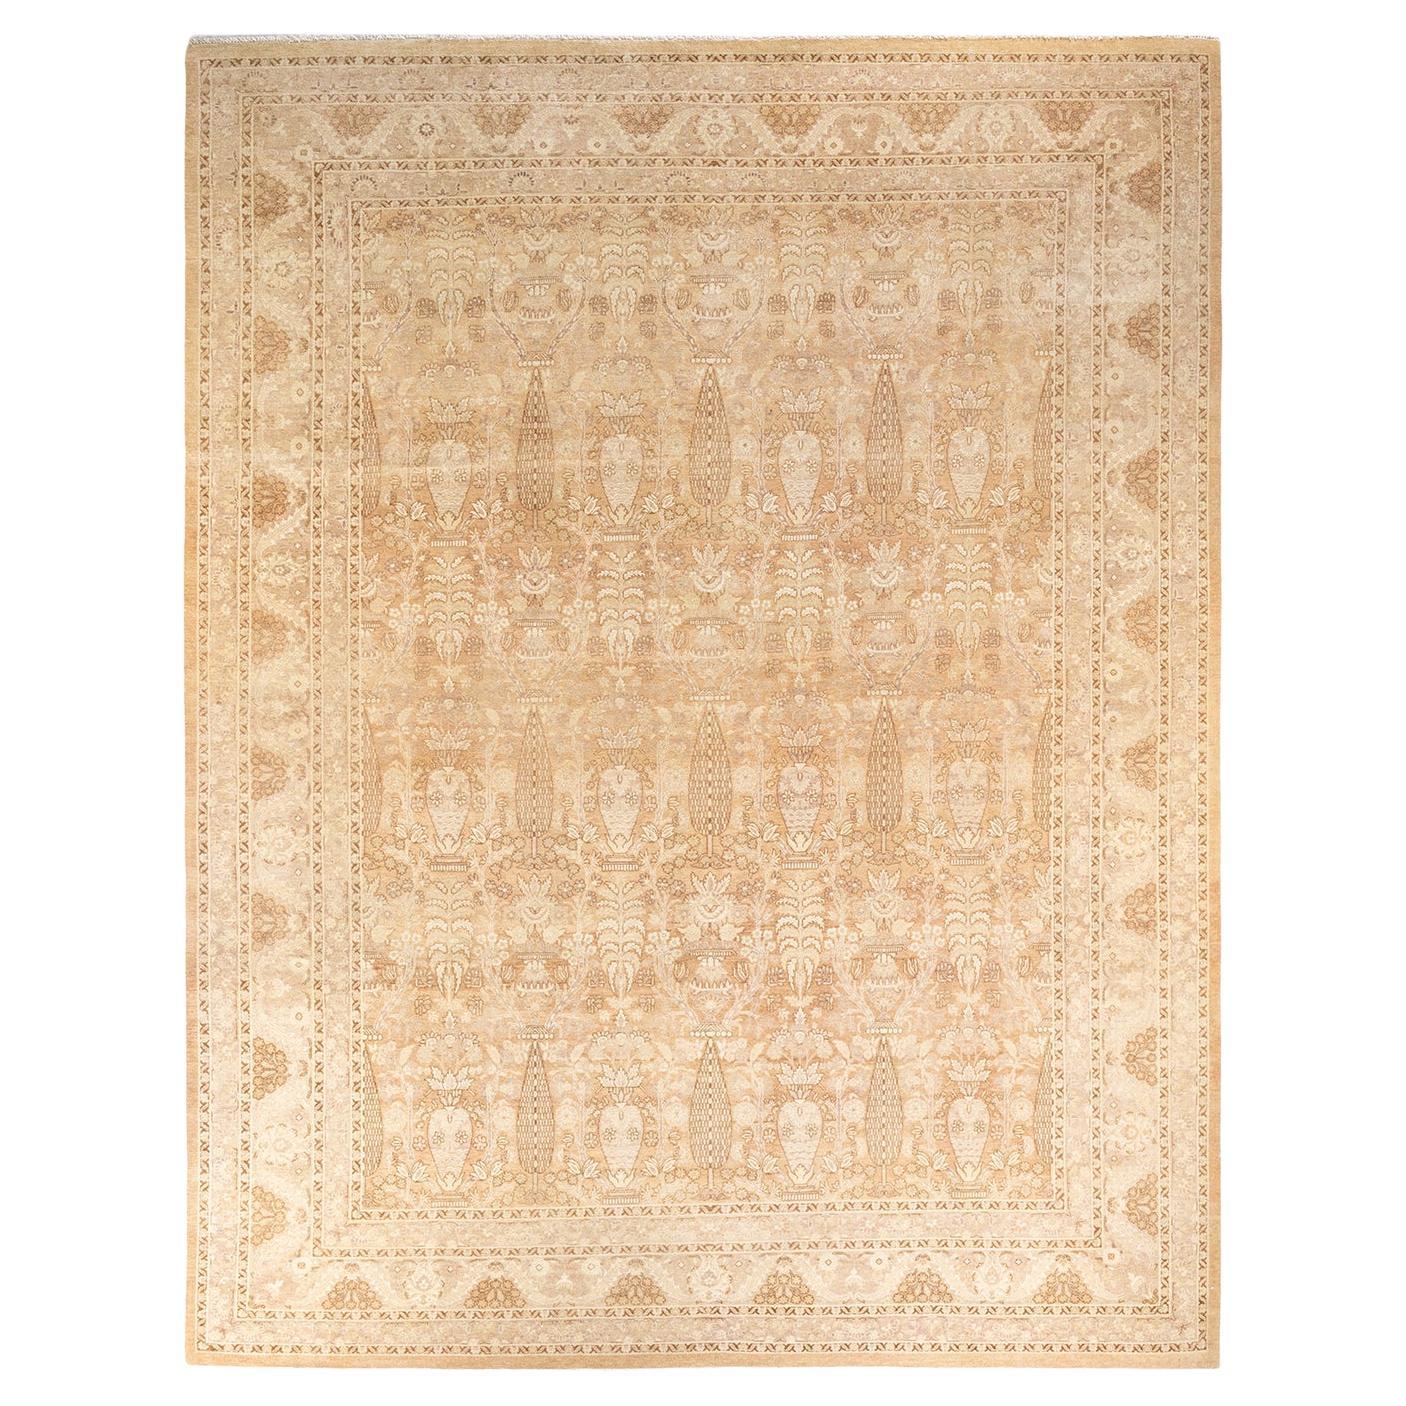 Traditional Mogul Hand Knotted Wool Beige Area Rug